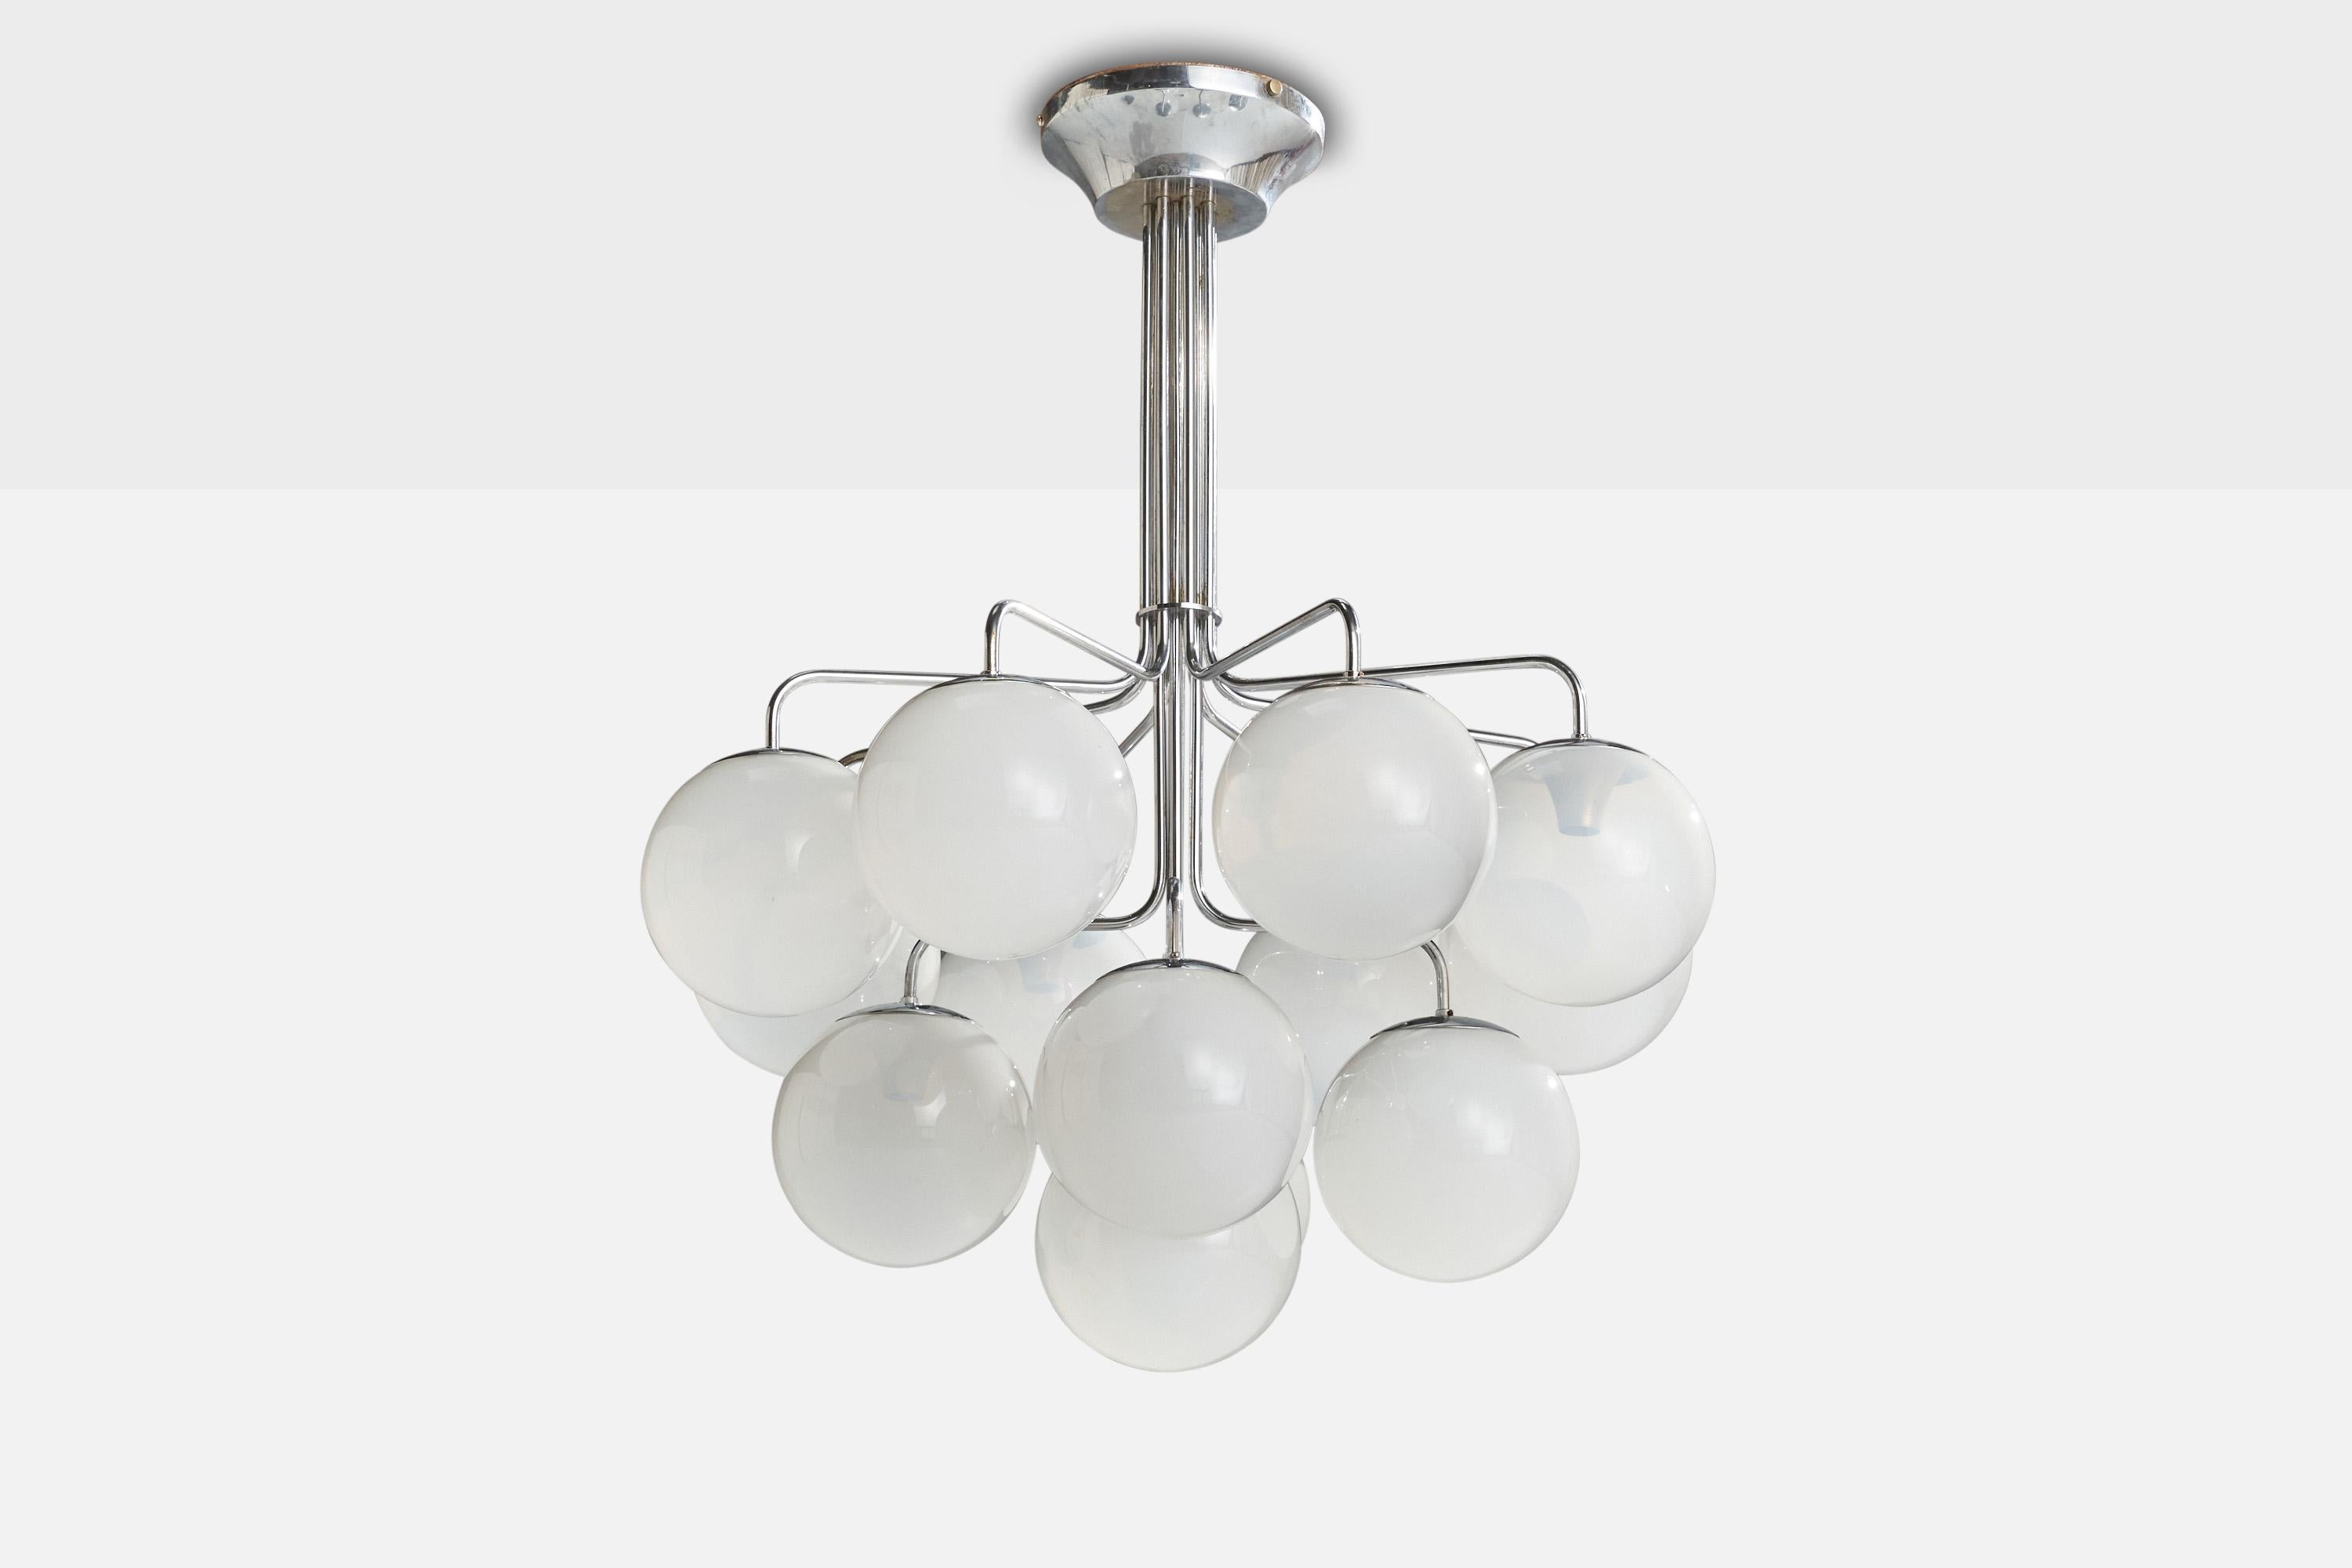 A nickel-plated brass and opaline glass chandelier designed and produced in Italy, 1970s.

Dimensions of canopy (inches): 3” H x 9” Diameter
Socket takes standard E-14 bulbs. 13 sockets.There is no maximum wattage stated on the fixture. All lighting